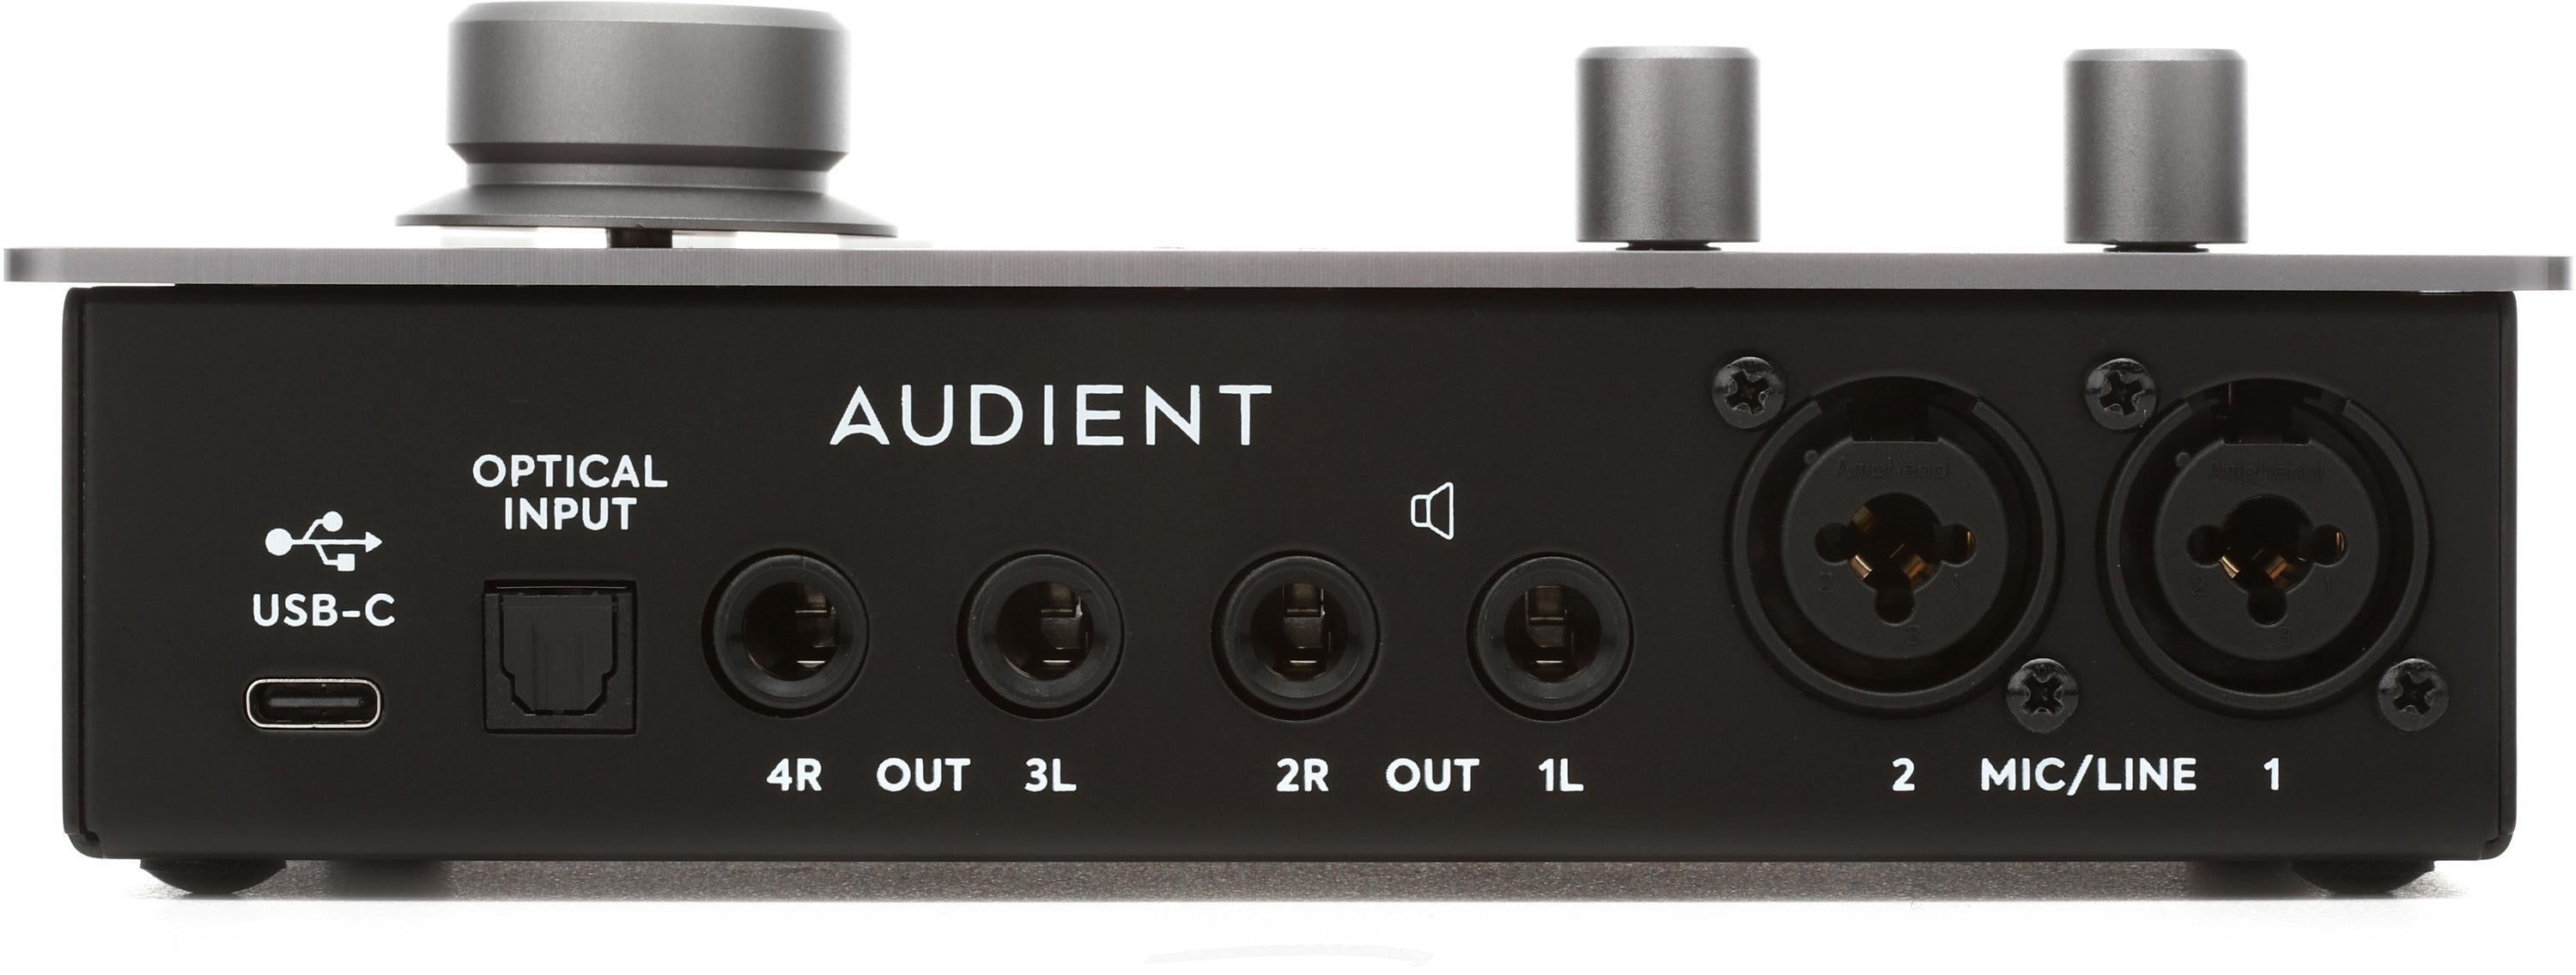 Audient iD14 MKII USB-C Audio Interface | Sweetwater